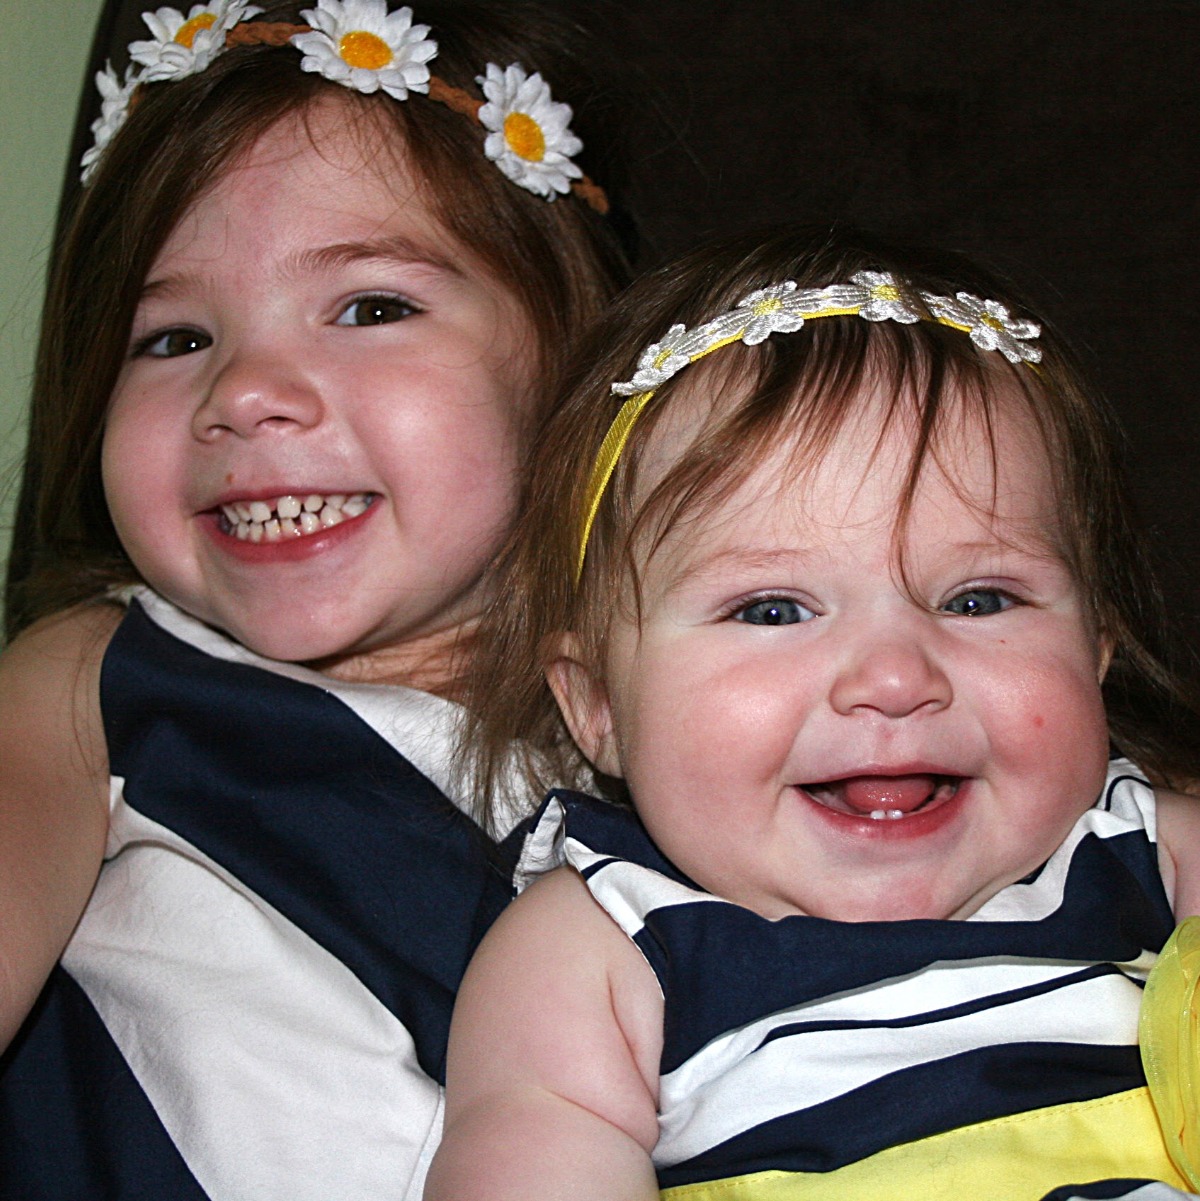 Sweet sisters wearing daisy headbands and navy blue and white striped dresses